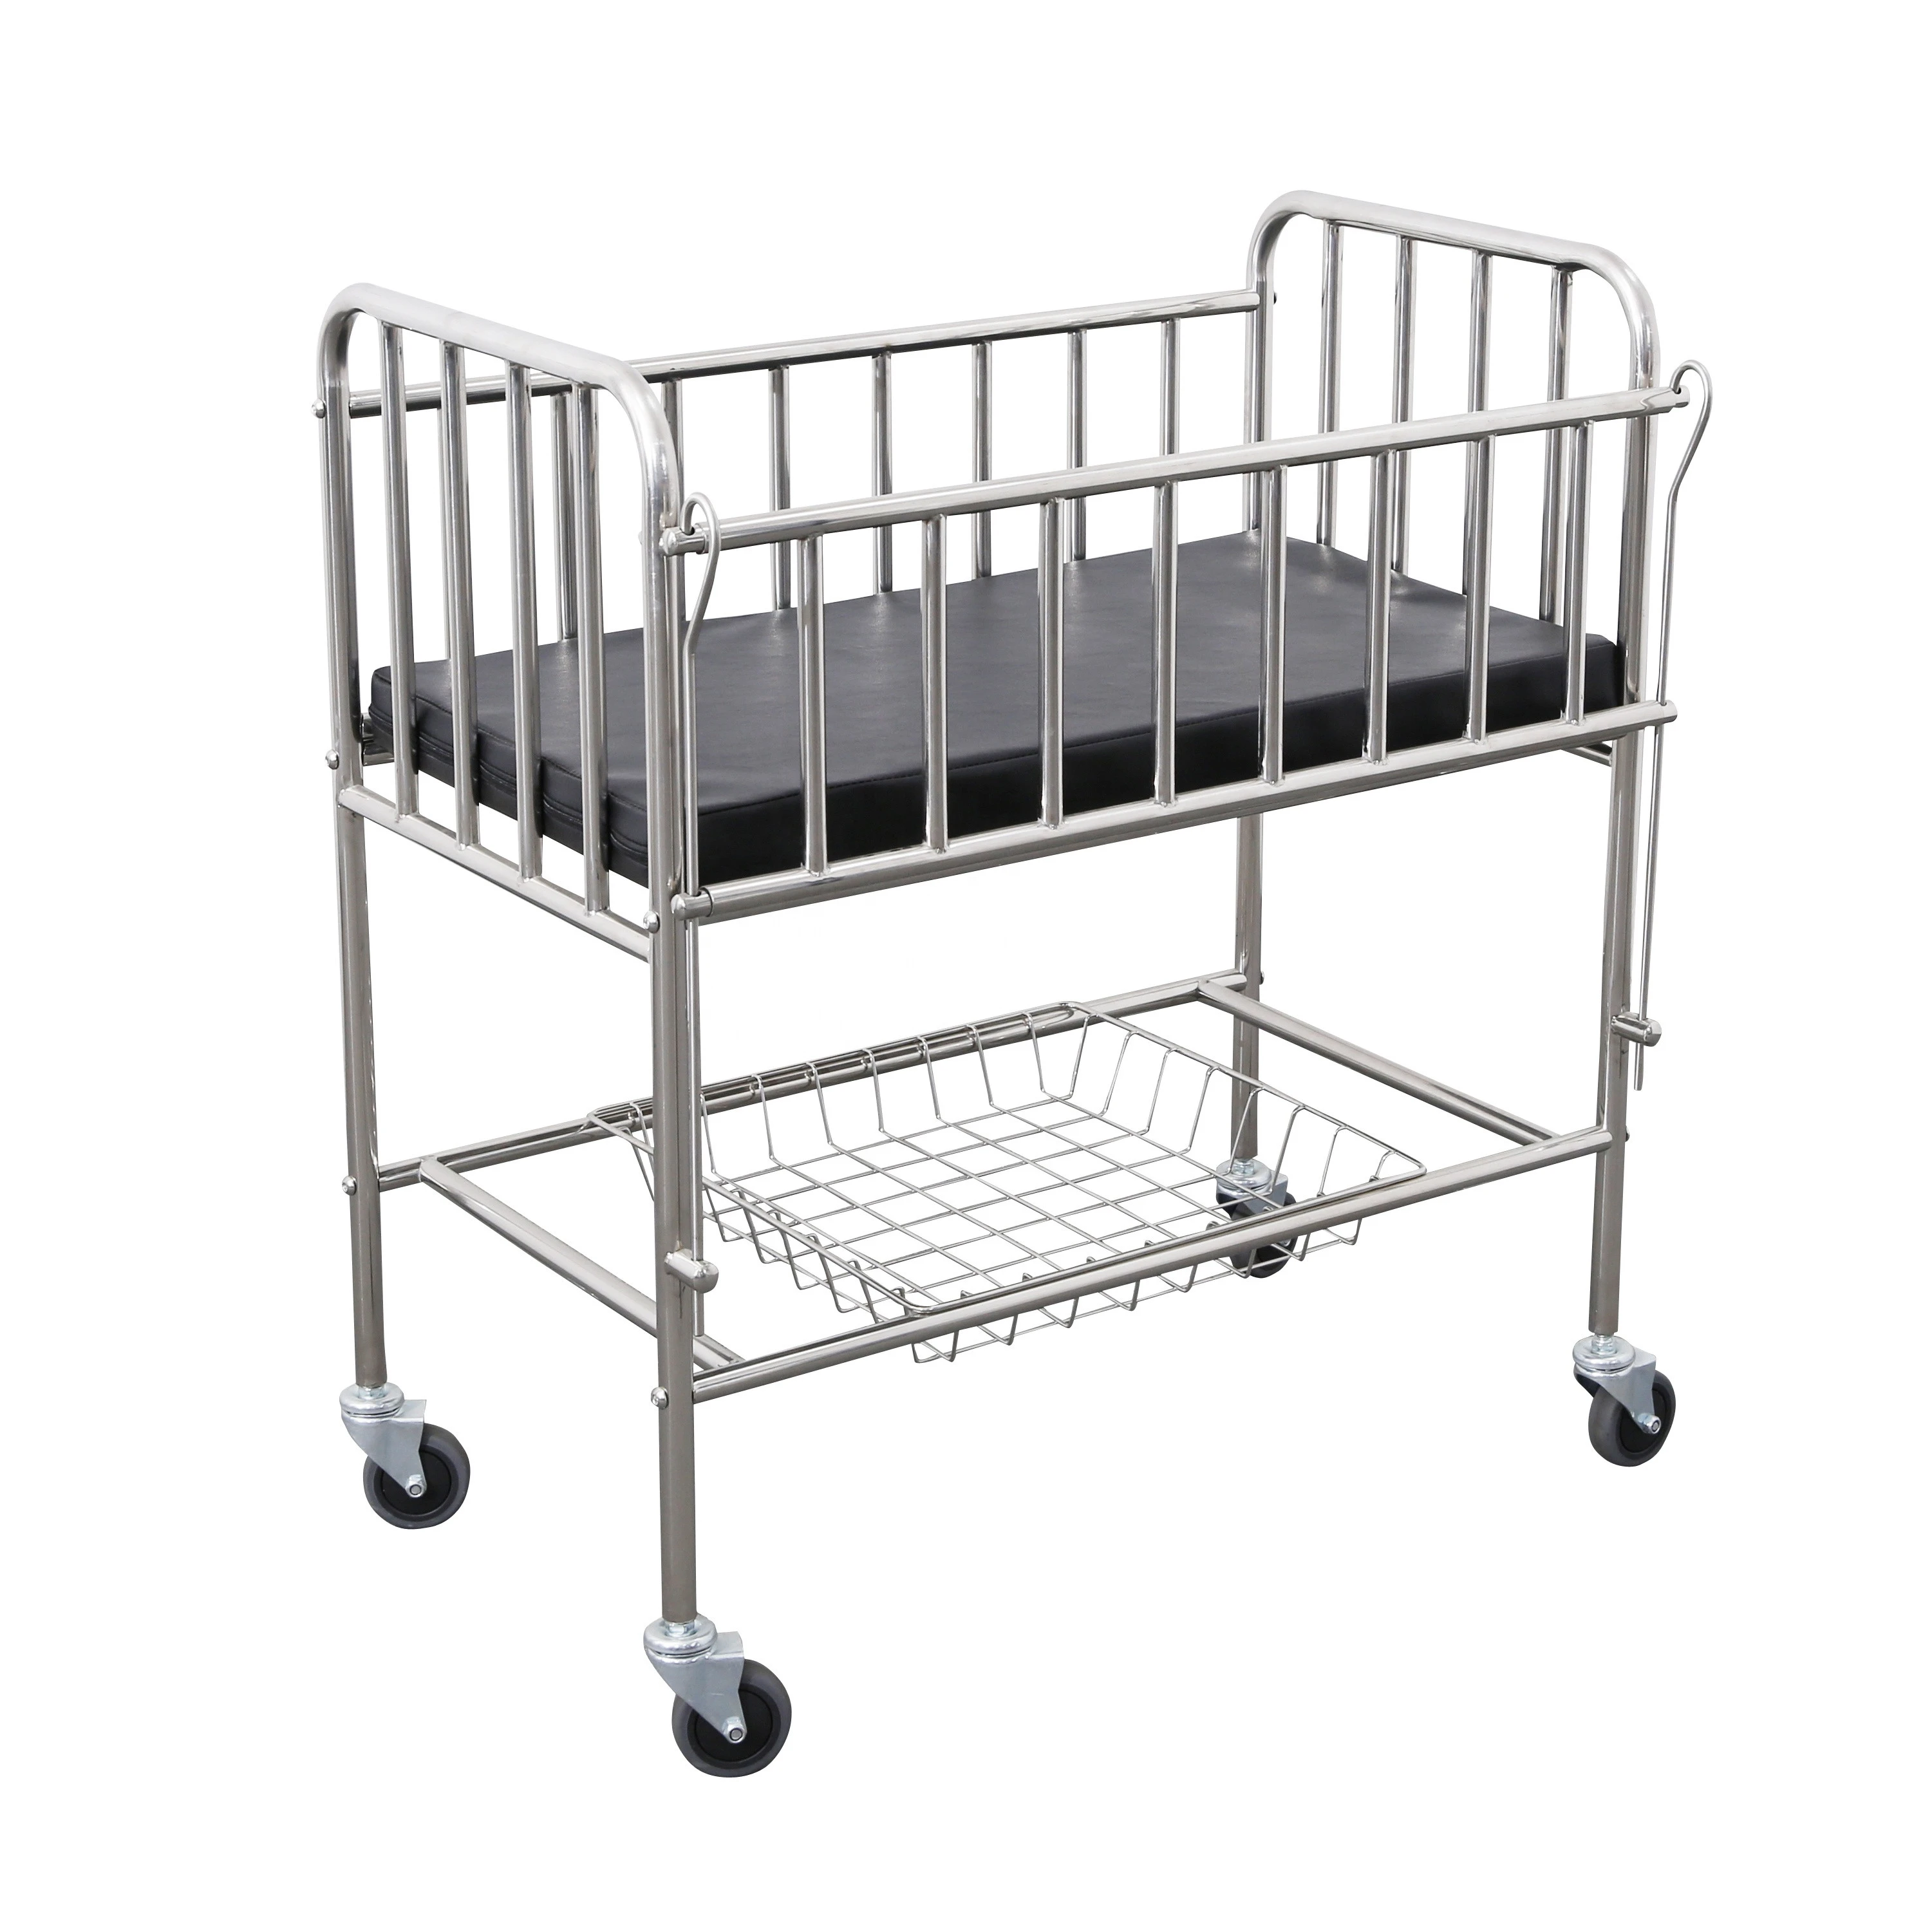 Portable stainless steel infant hospital medical Infant baby bed